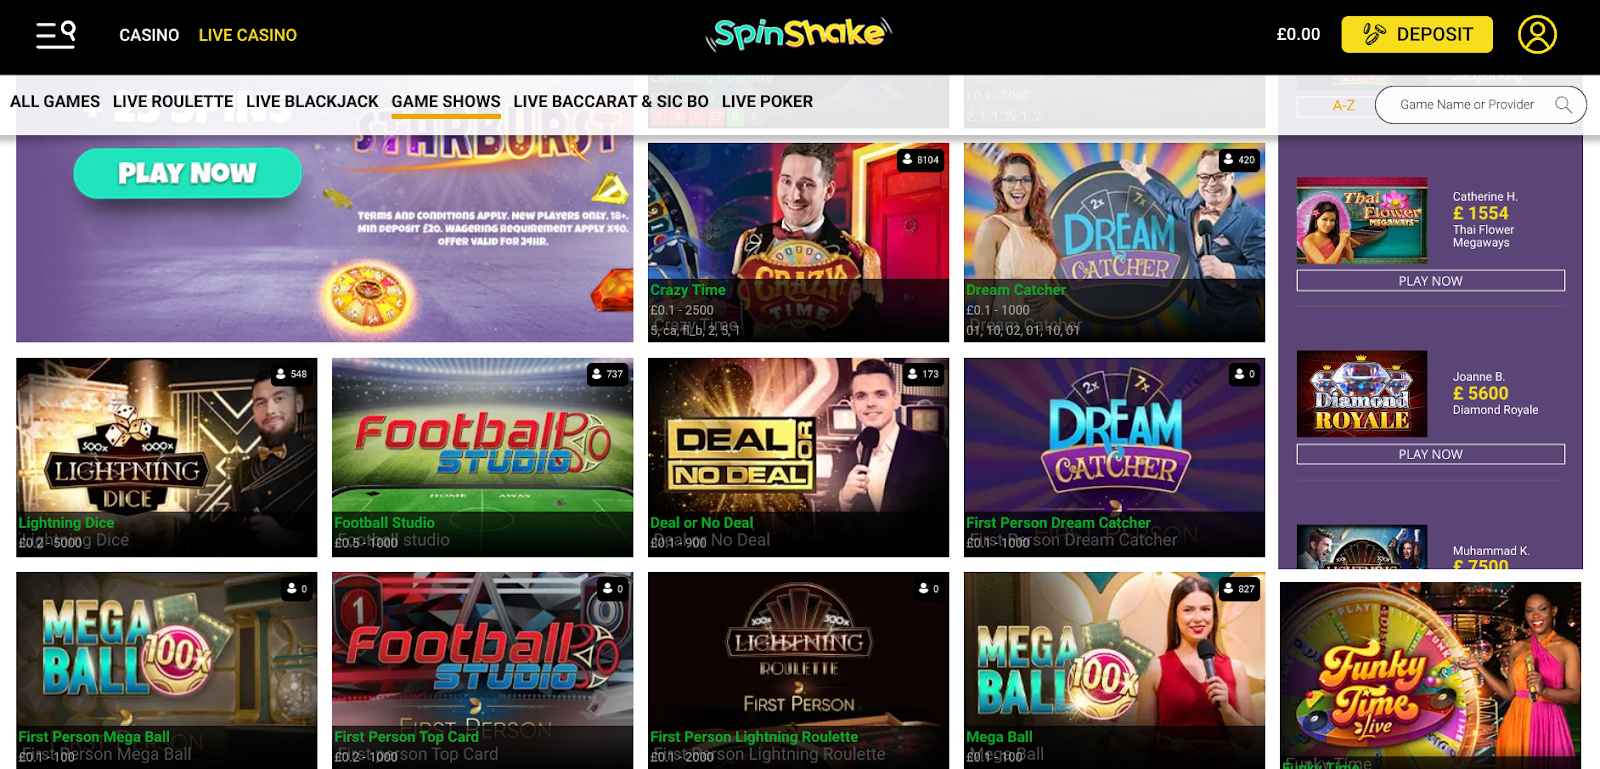 Game Shows at Spin Shake Live Casino